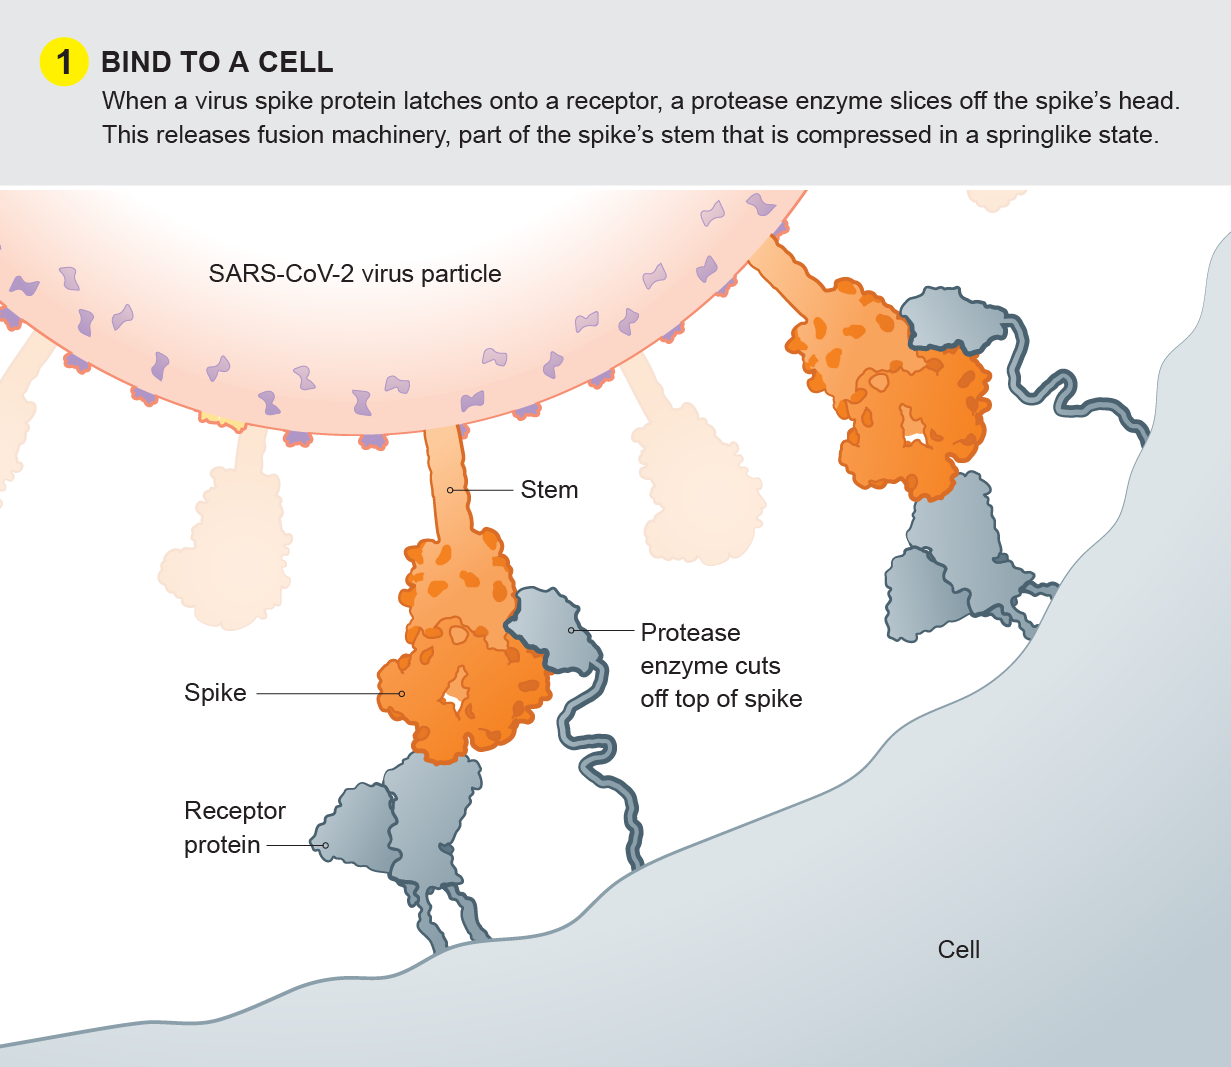 Virus binds to a lung cell